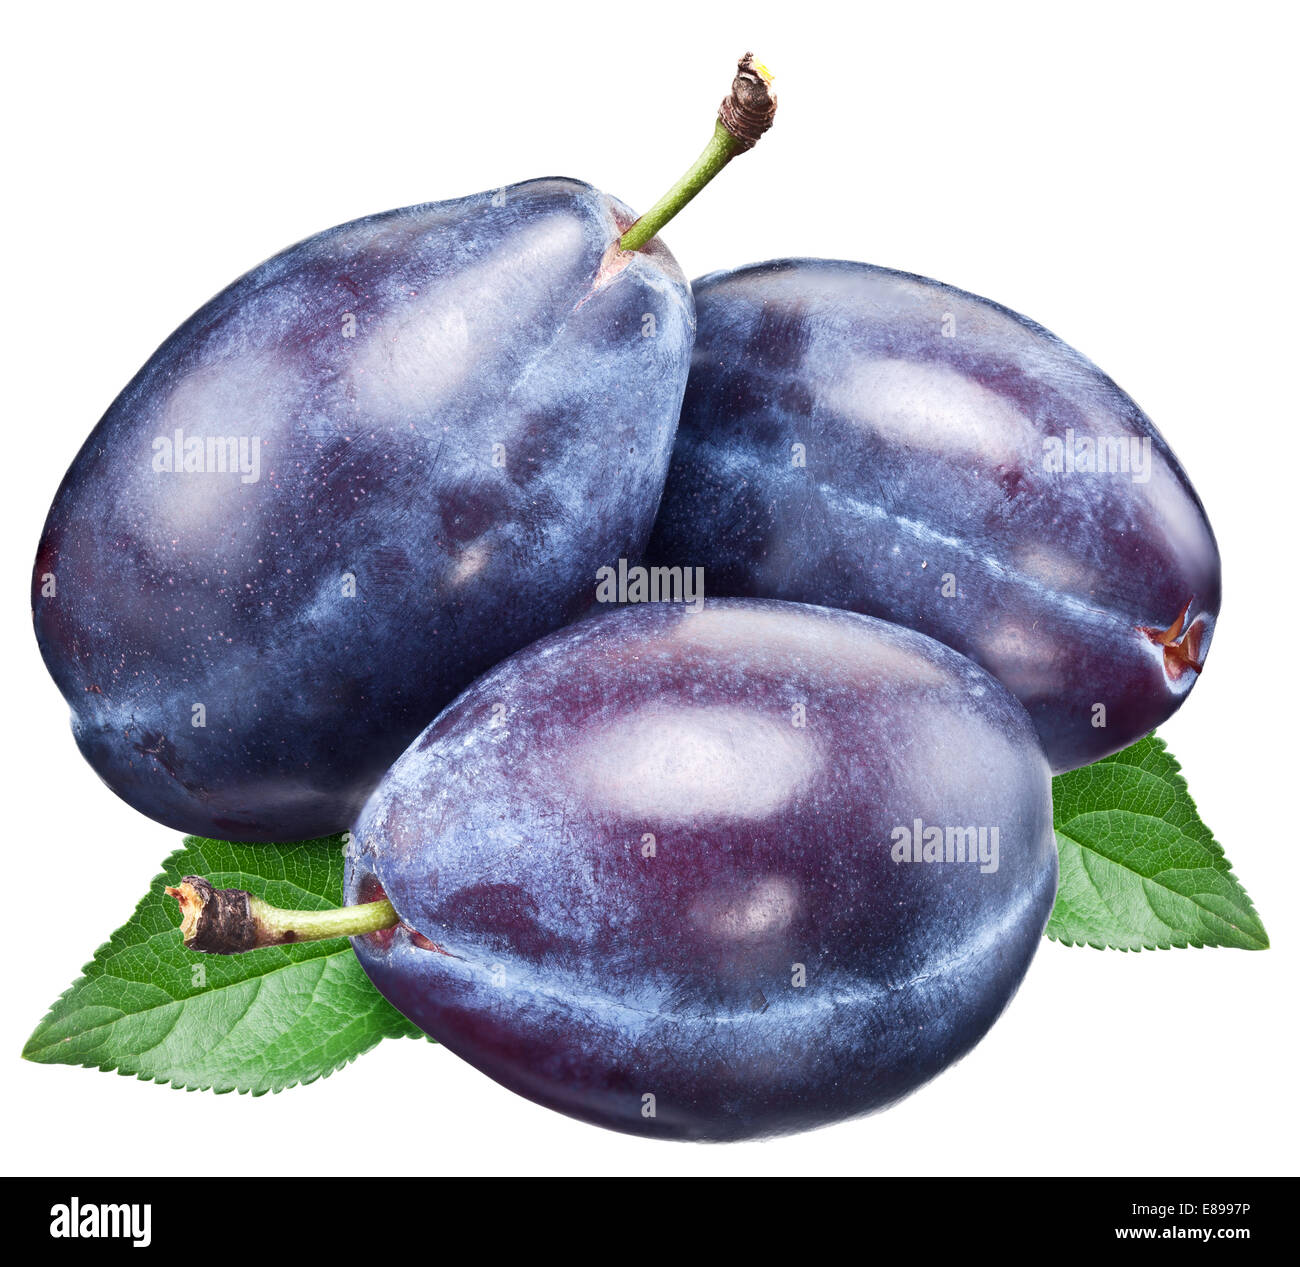 Three plums with leaf. File contains clipping paths. Stock Photo